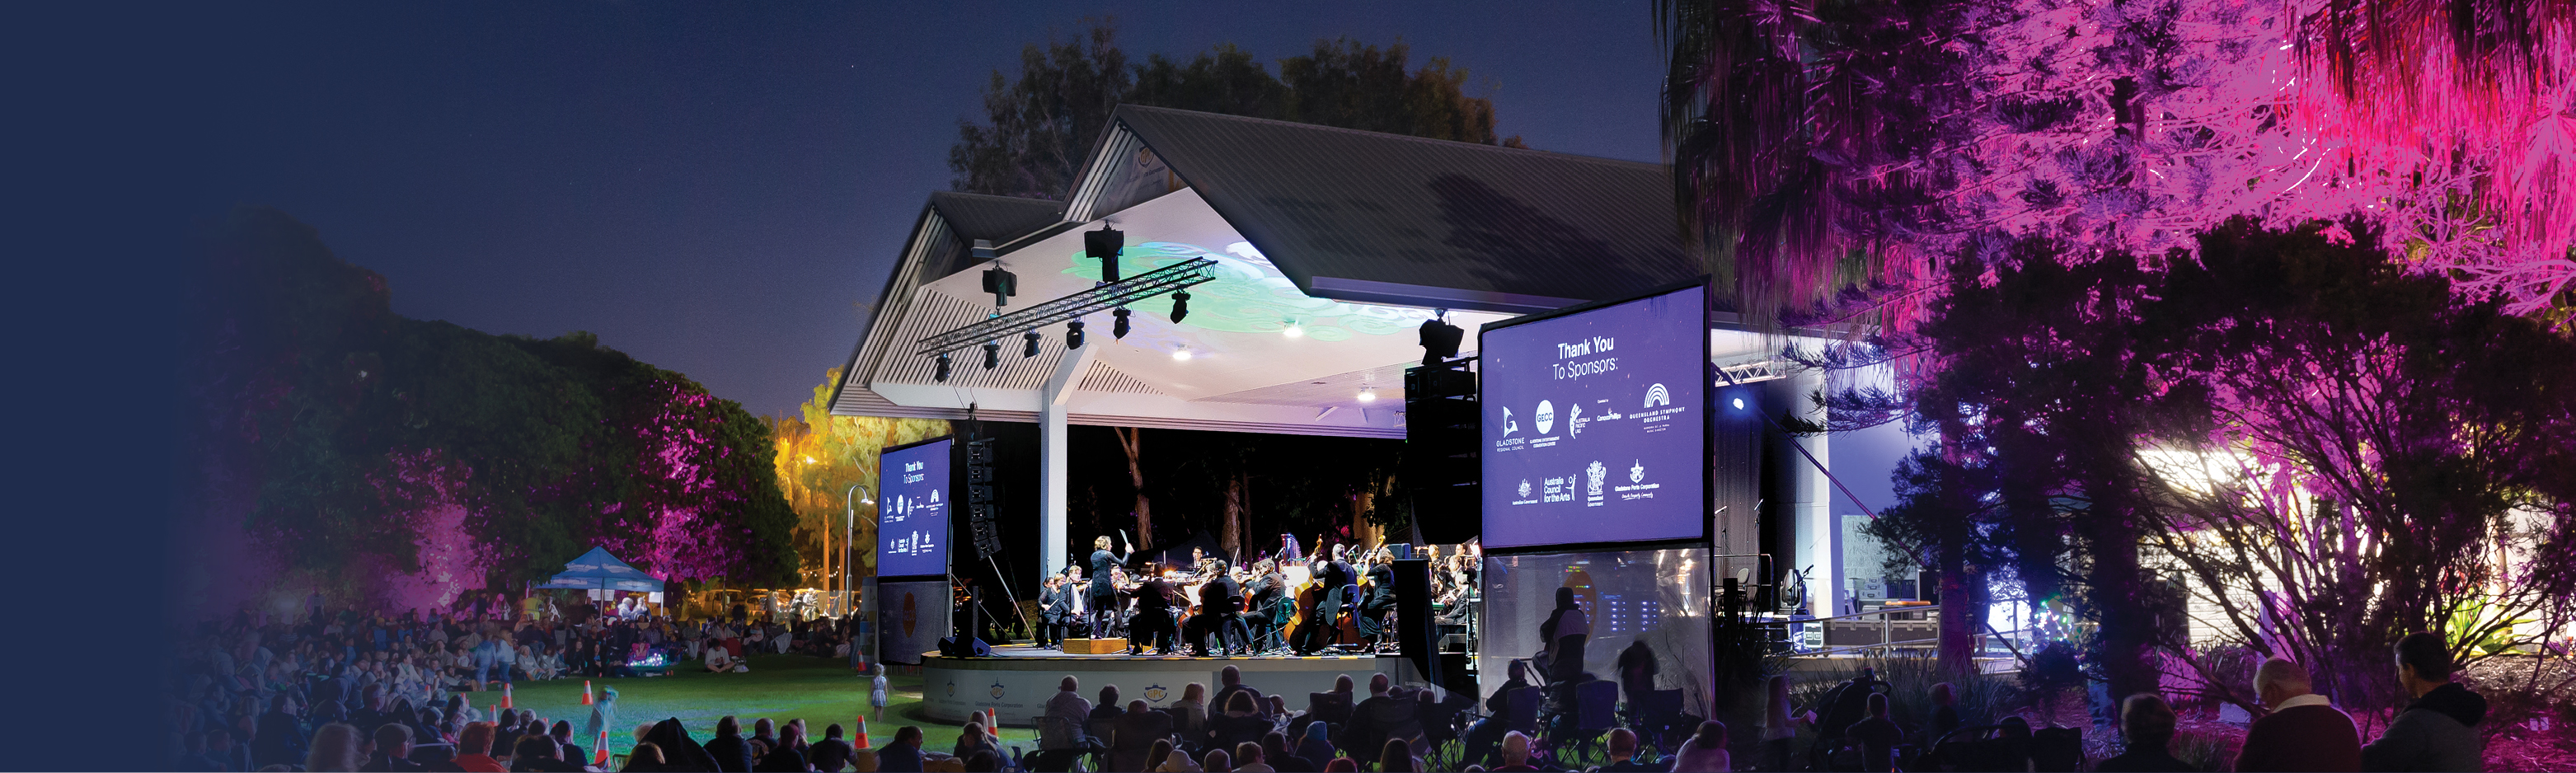 QSO Symphony Under the Stars Carousel